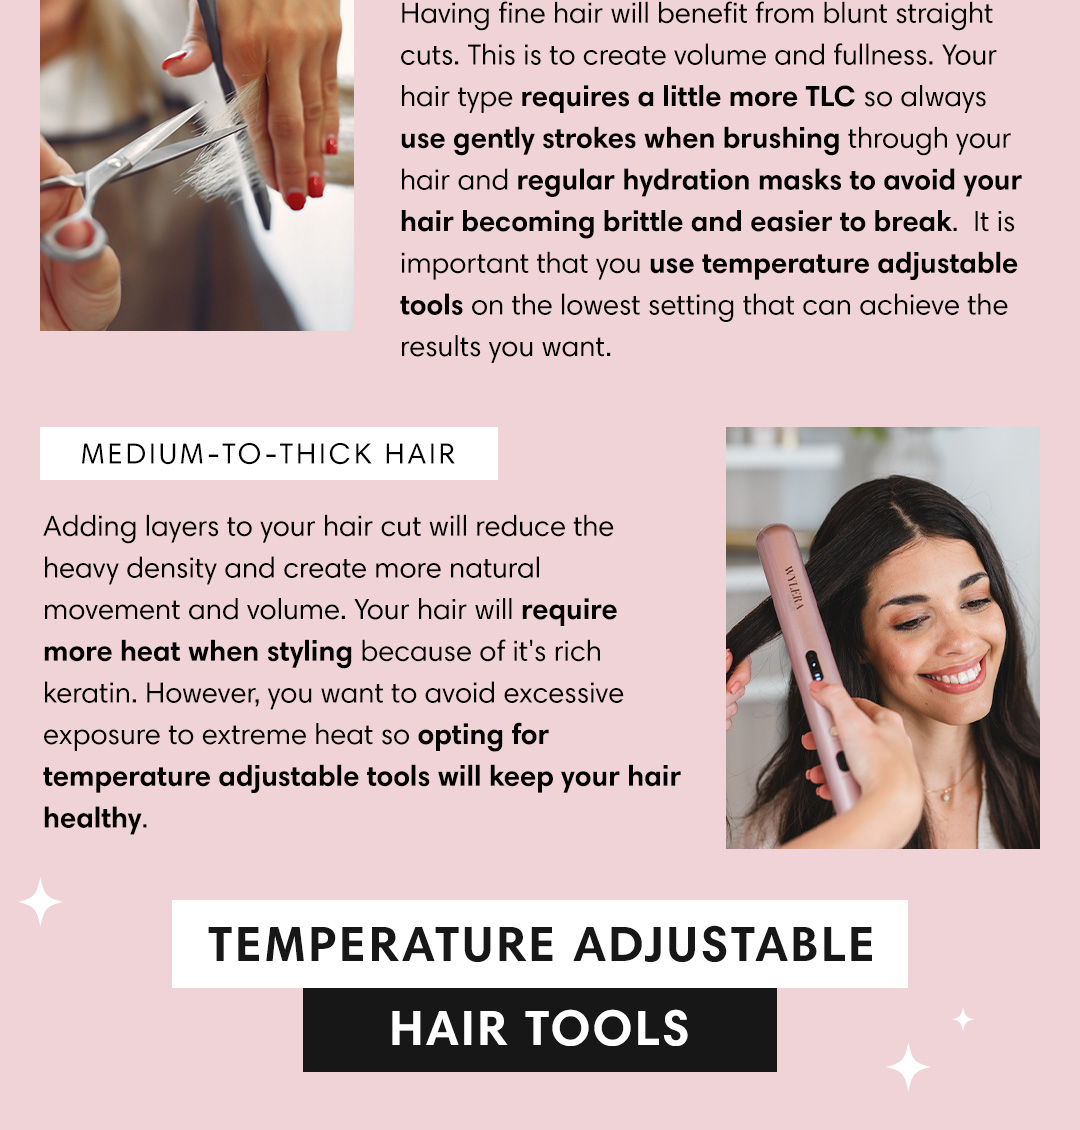 Having fine hair will benefit from blunt straight cuts. This is to create volume and fullness. Your hair type requires a little more TLC so always use gently strokes when brushing through your hair and regular hydration masks to avoid your hair becoming brittle and easier to break. 1t is important that you use temperature adjustable tools on the lowest setting that can achieve the results you want. MEDIUM-TO-THICK HAIR Adding layers to your hair cut will reduce the heavy density and create more natural movement and volume. Your hair will require more heat when styling because of it's rich keratin. However, you want to avoid excessive exposure to extreme heat so opting for temperature adjustable tools will keep your hair healthy. TEMPERATURE ADJUSTABLE HAIR TOO 